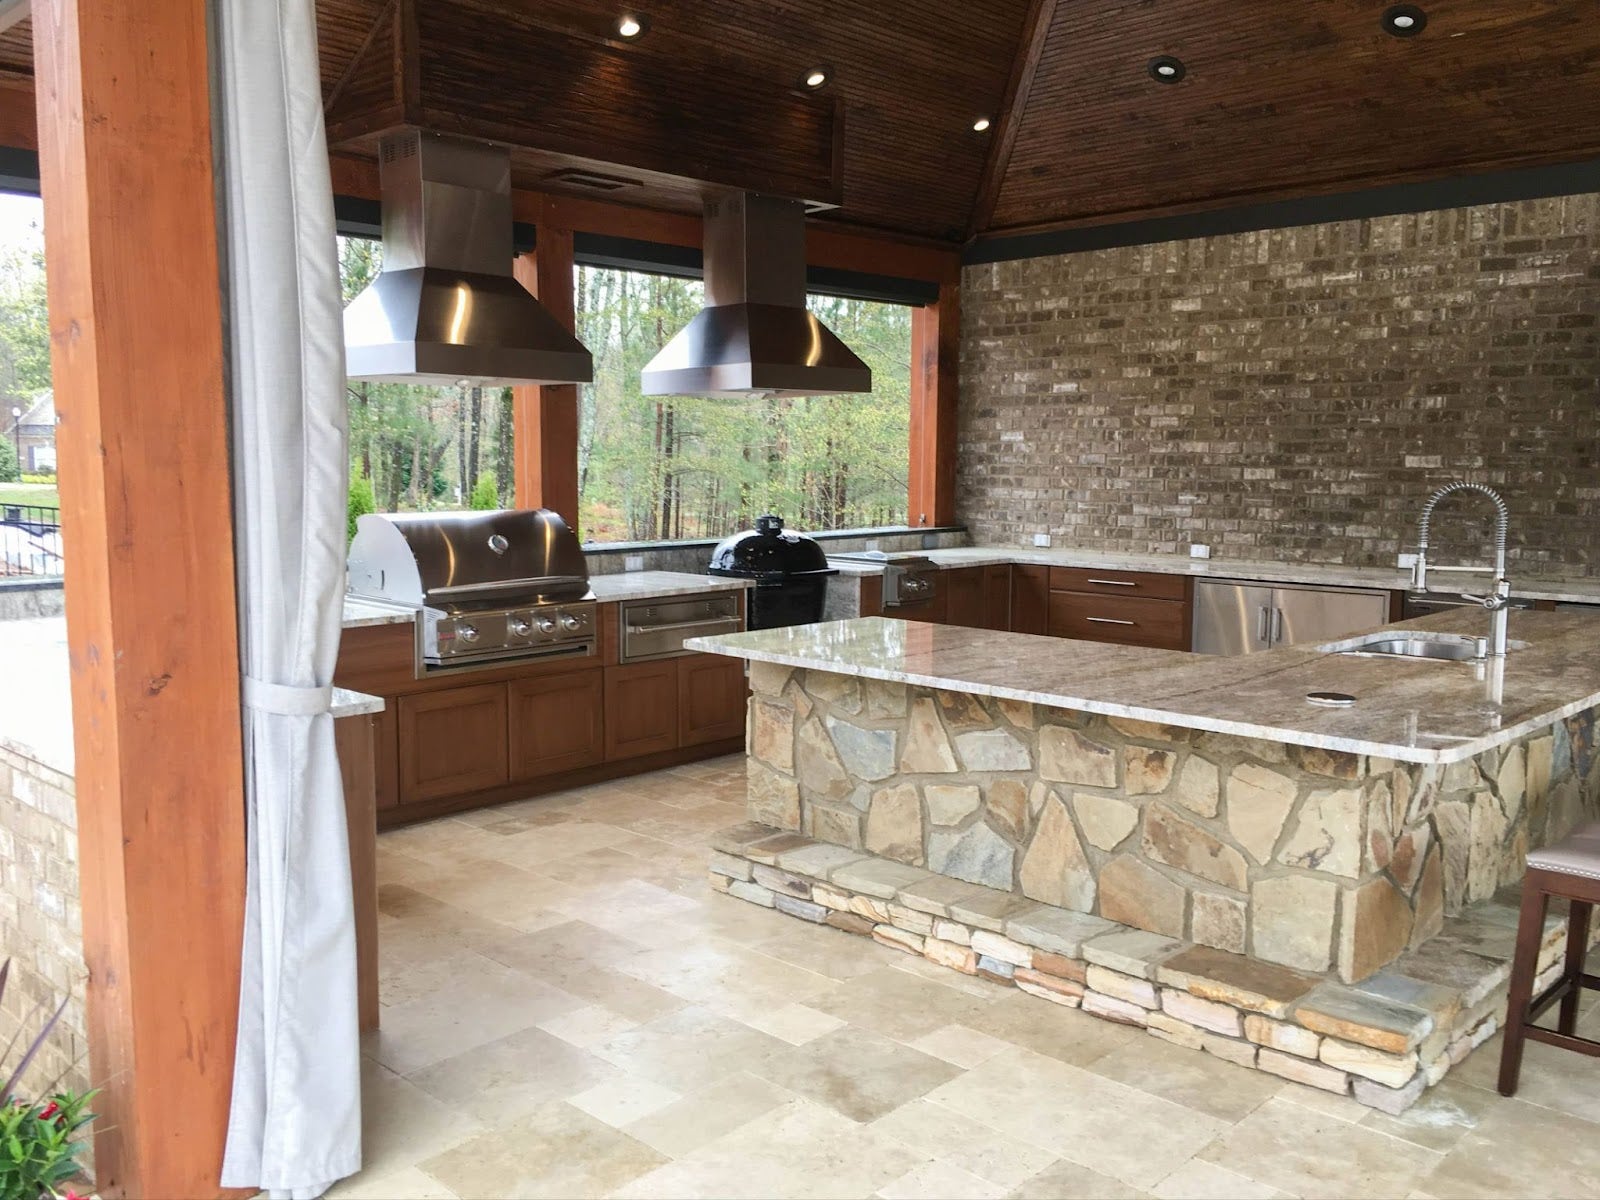 Expansive covered patio with a deluxe cooking area, including a grill and smoker under vent hoods, set against a brick wall with scenic views of nature. - Proline Range Hoods - prolinerangehoods.com 